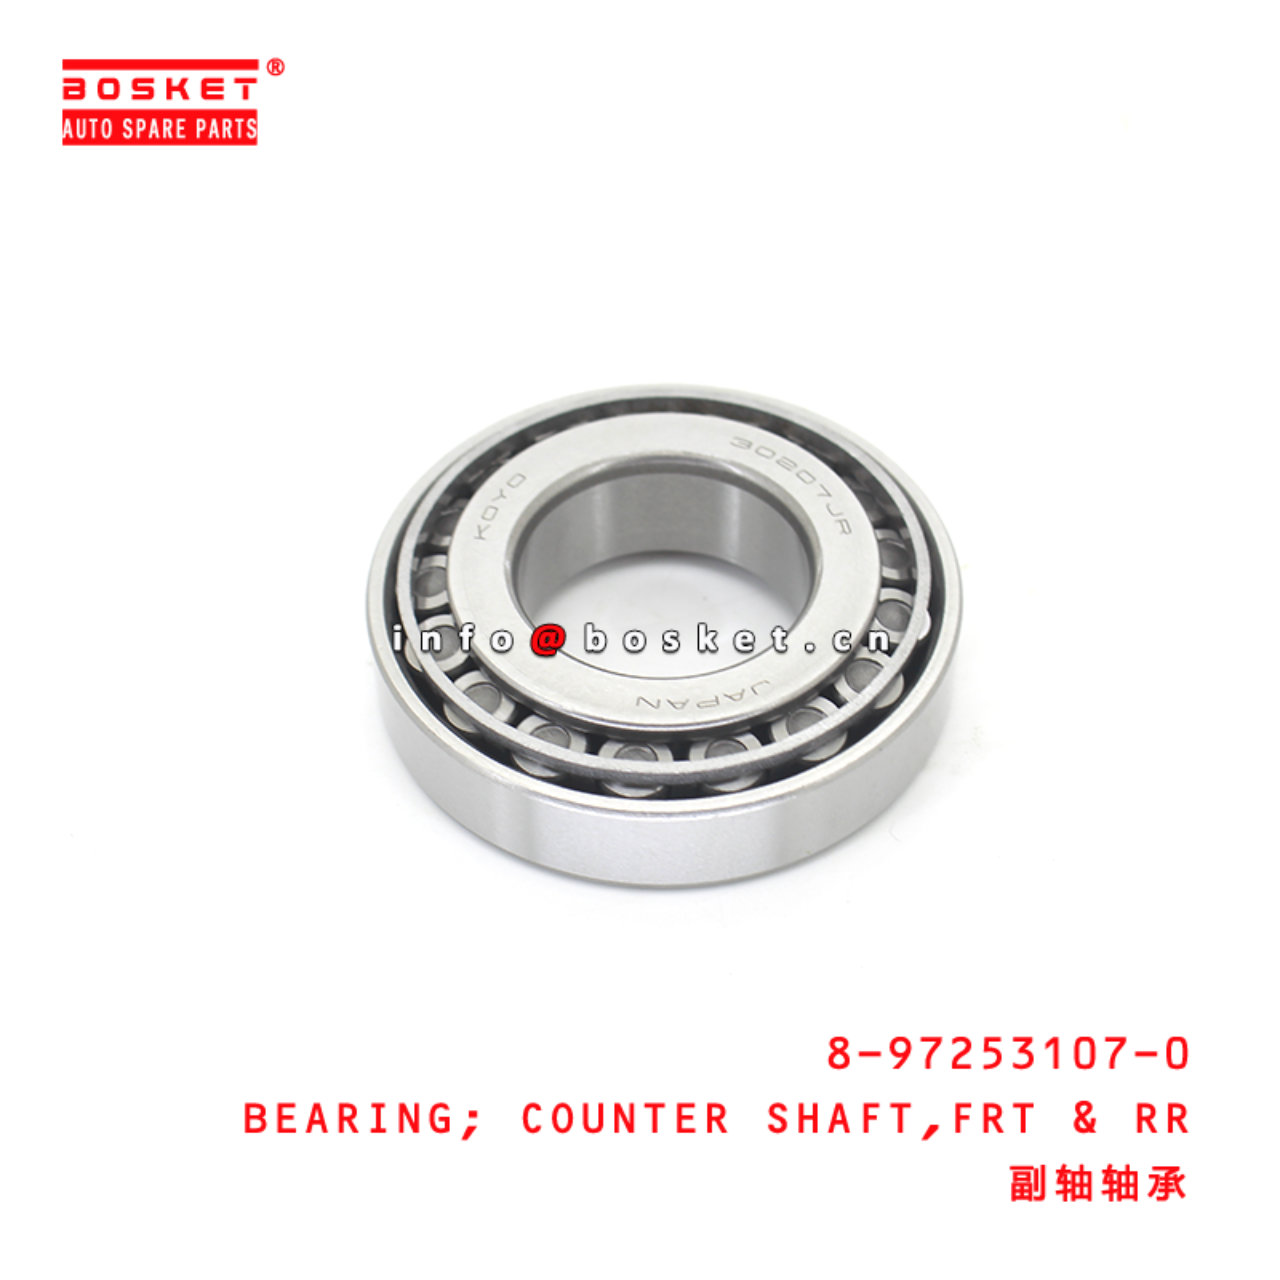 8-97253107-0 Front And Rear Counter Shaft Bearing ...